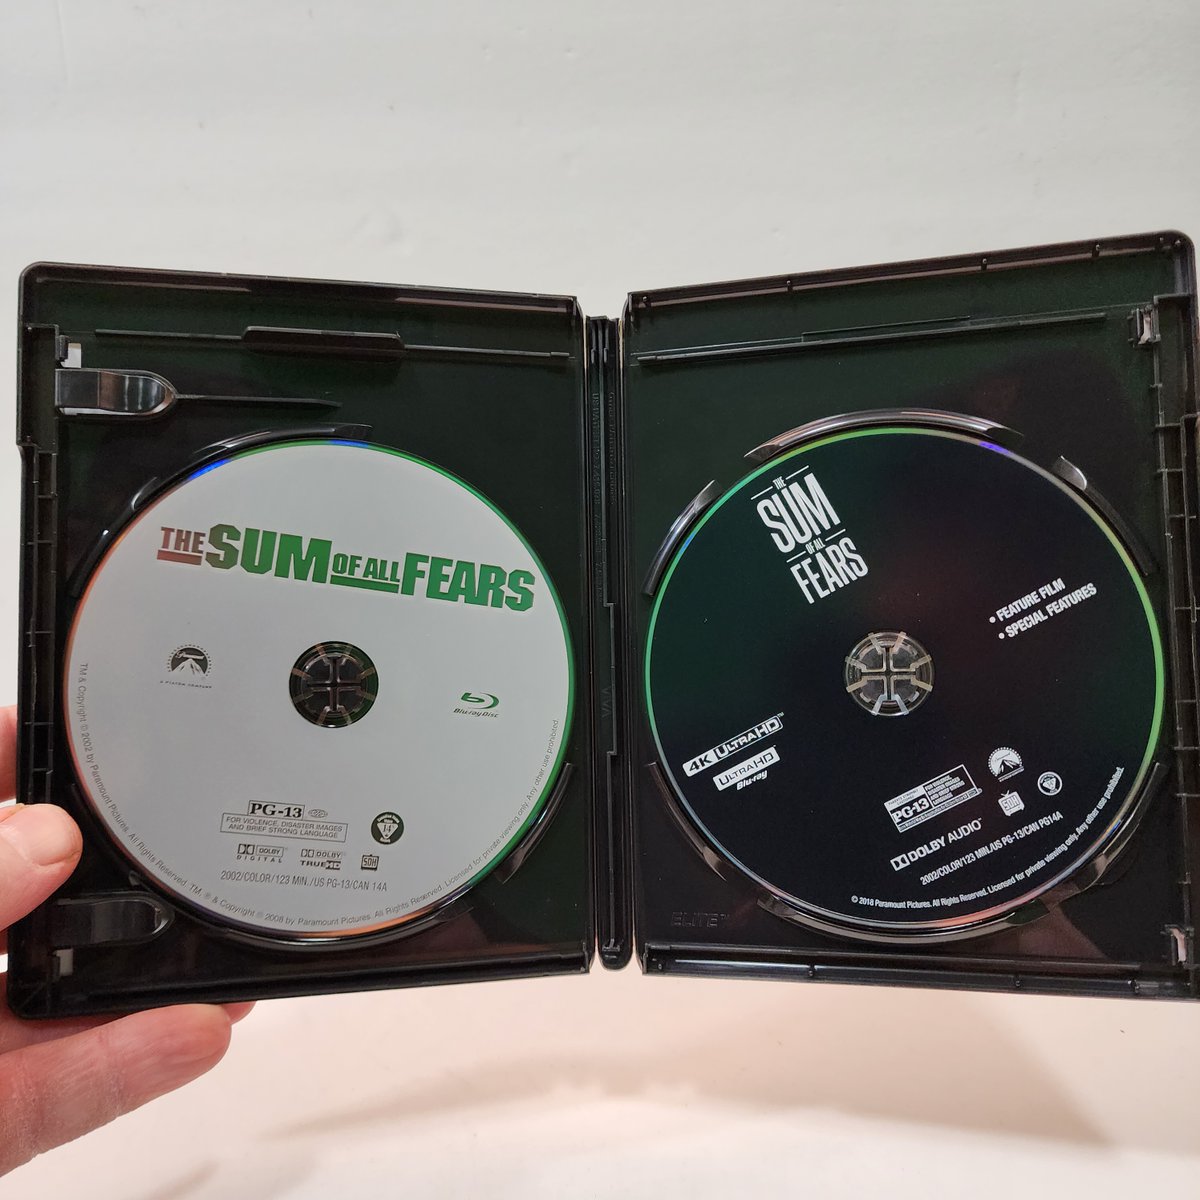 The Sum Of All Fears on 4K UHD / Blu Ray / Digital
Buy Here! smpl.is/qphs #comissionsearned
Out Now from Paramount Pictures
#thesumofallfears #4kuhd #bluray #mailday #movie #paramountpictures #reviewer #collector #collection